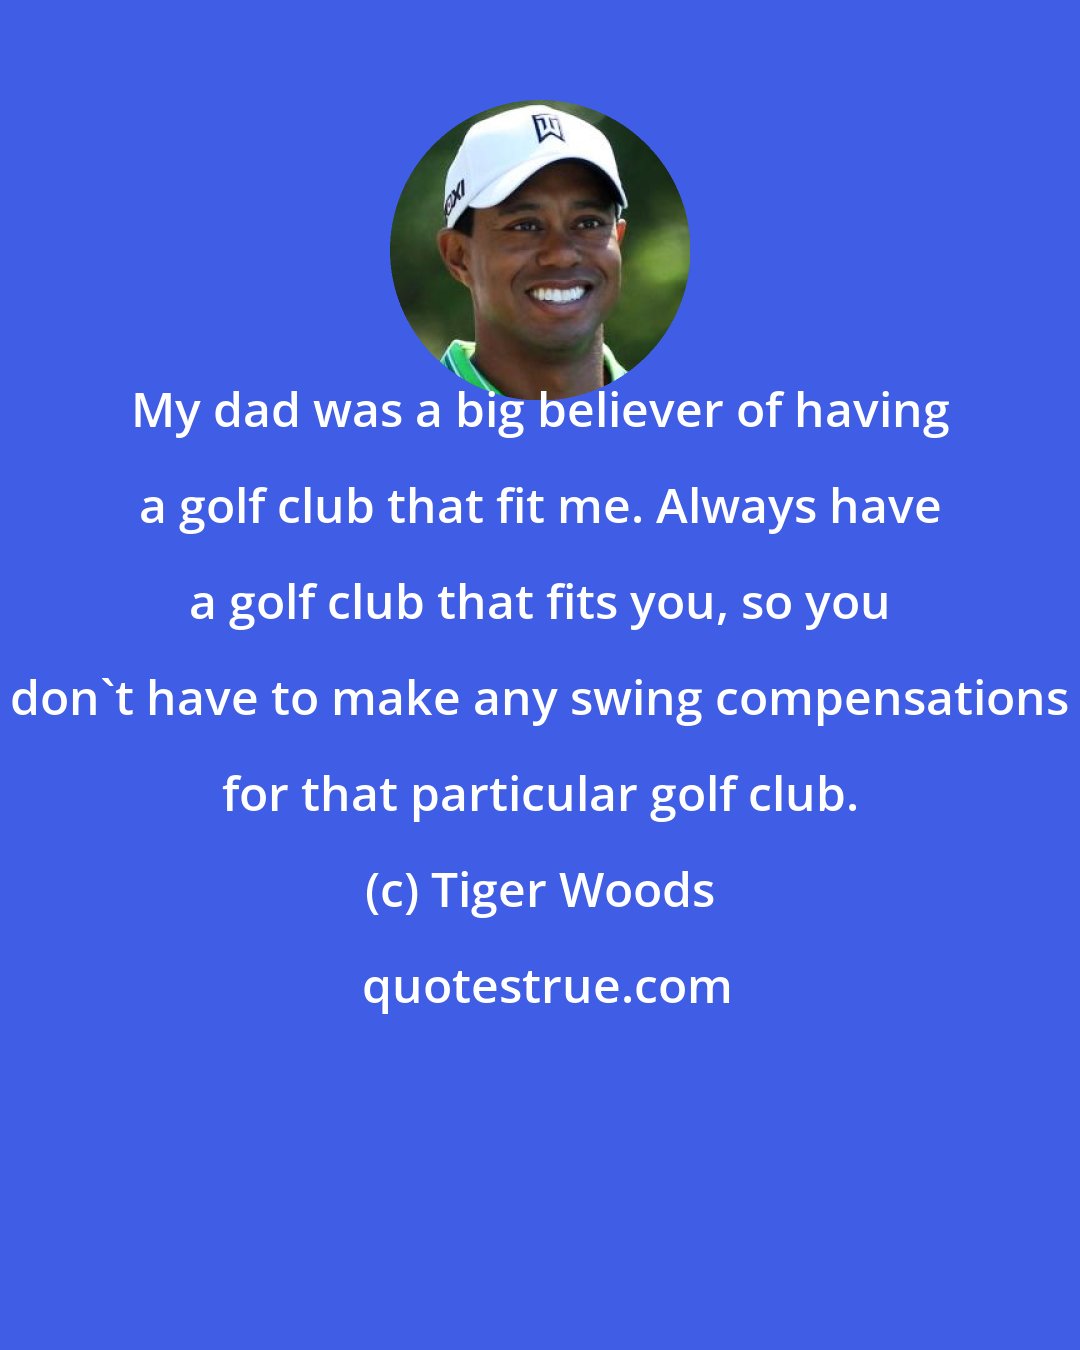 Tiger Woods: My dad was a big believer of having a golf club that fit me. Always have a golf club that fits you, so you don't have to make any swing compensations for that particular golf club.